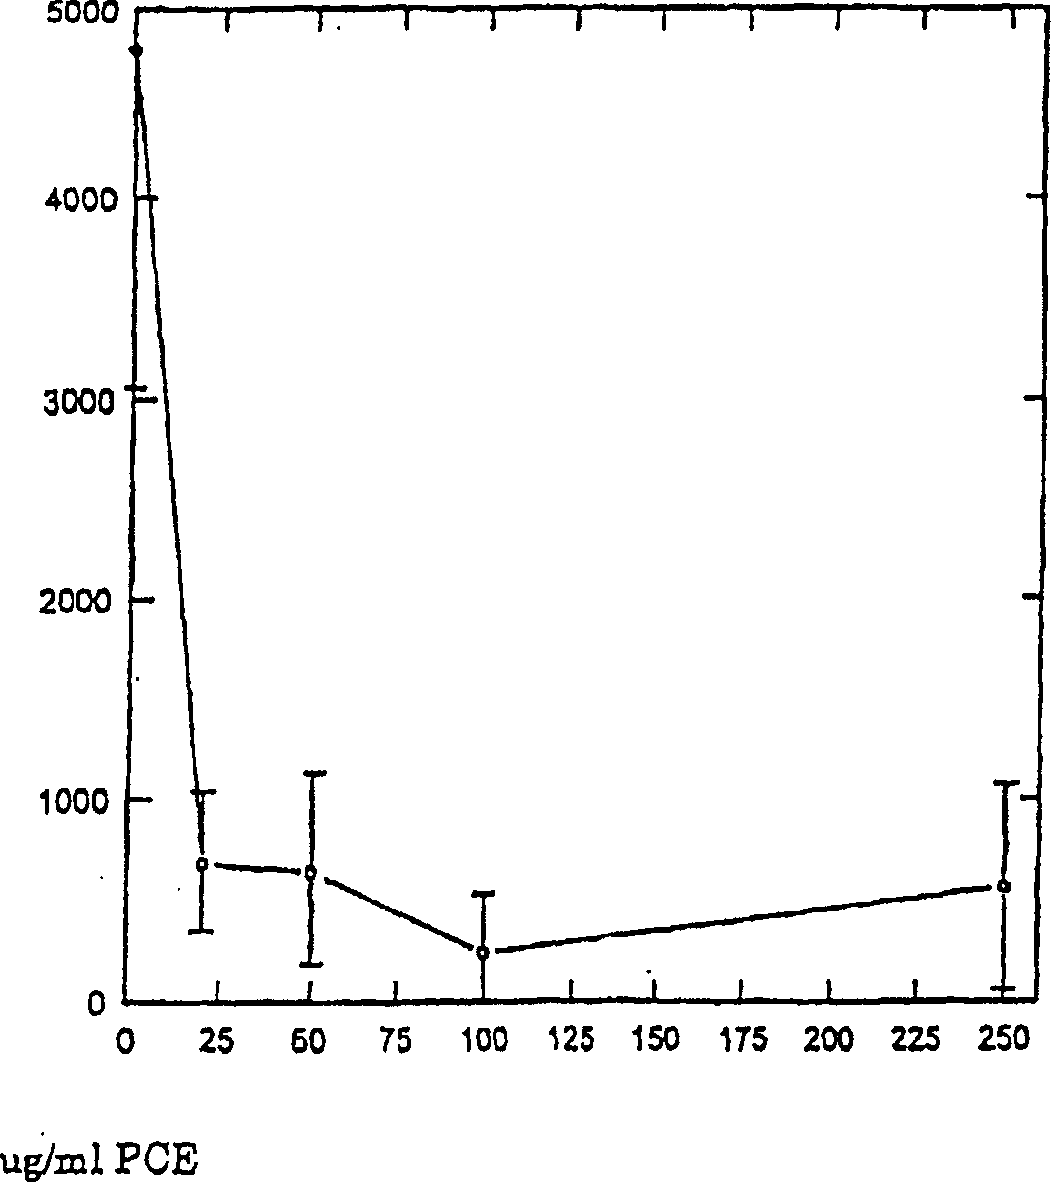 Anti-hsv agent for inhibiting replication of HSV-1 and HSV-2 and method of producing a substance having anti-HSV activity